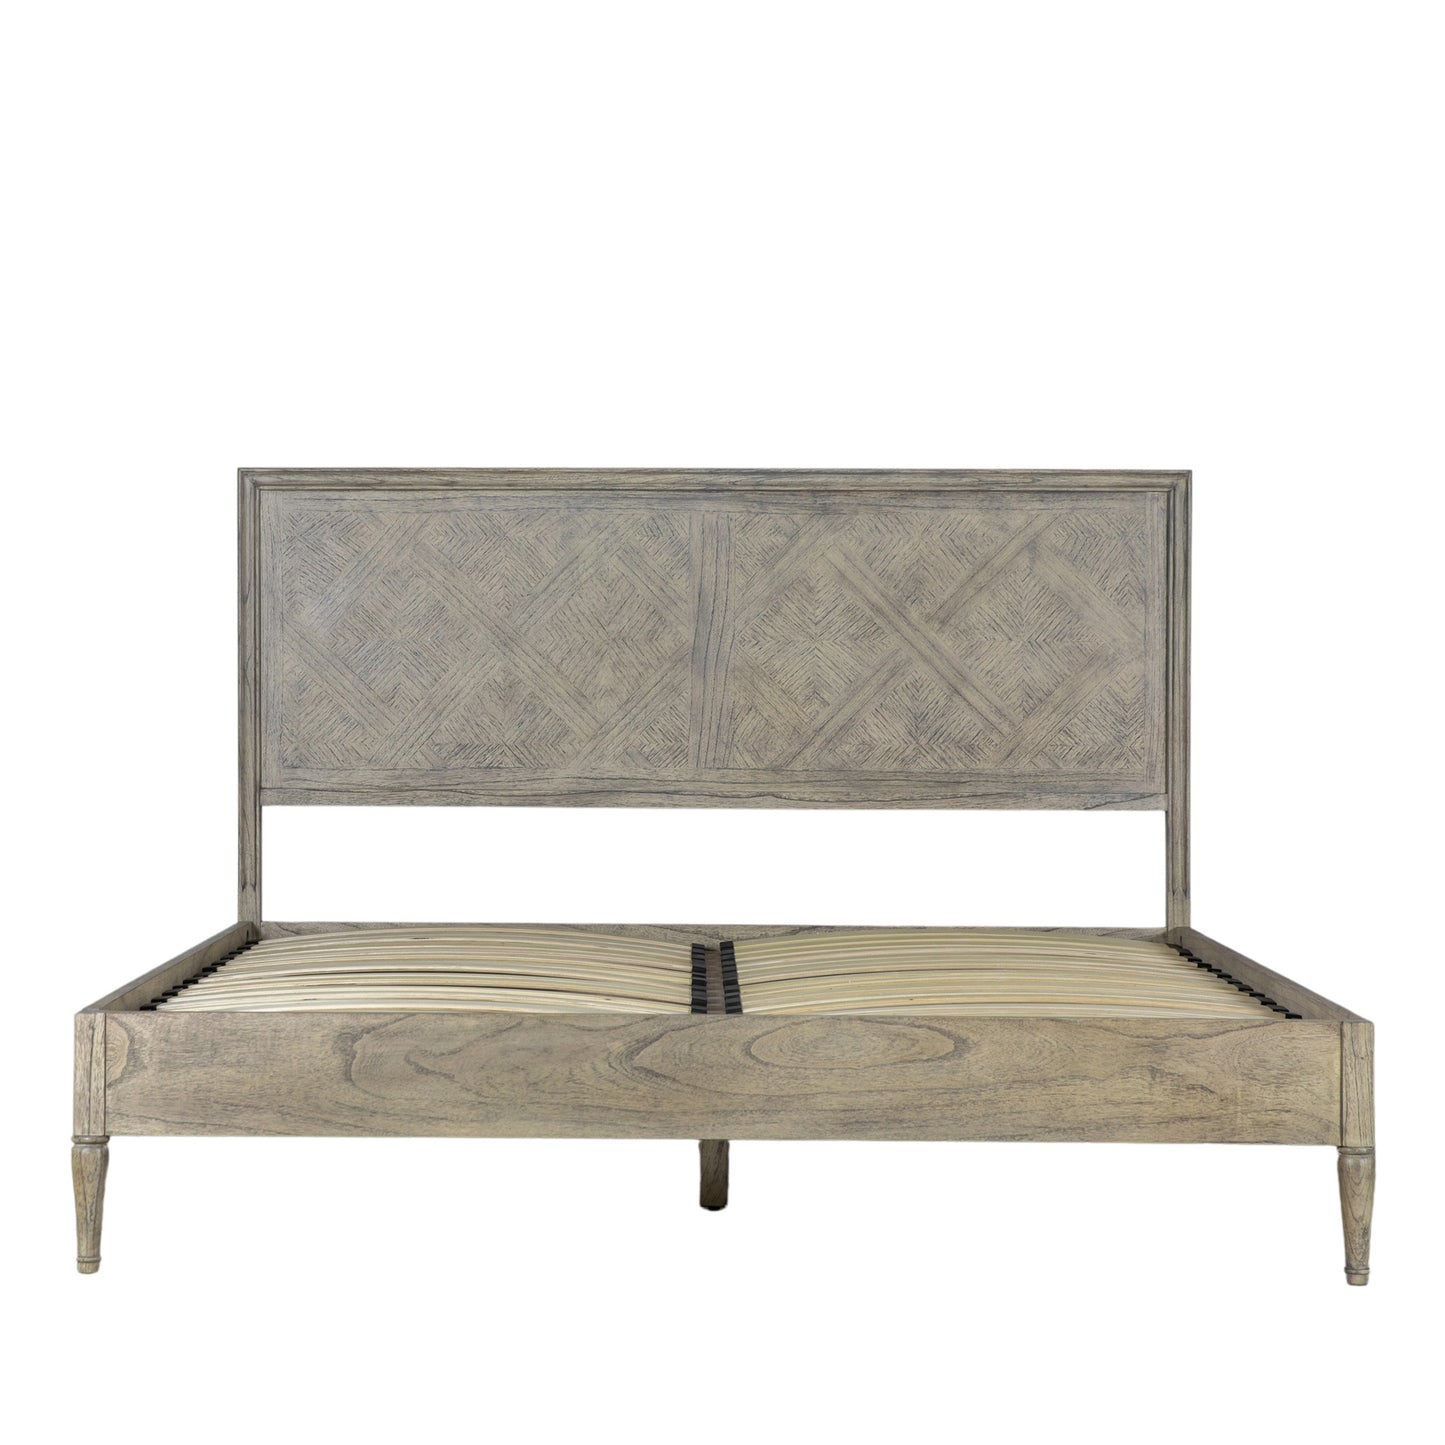 A Belsford 5' bed from Kikiathome.co.uk, perfect for interior decor.